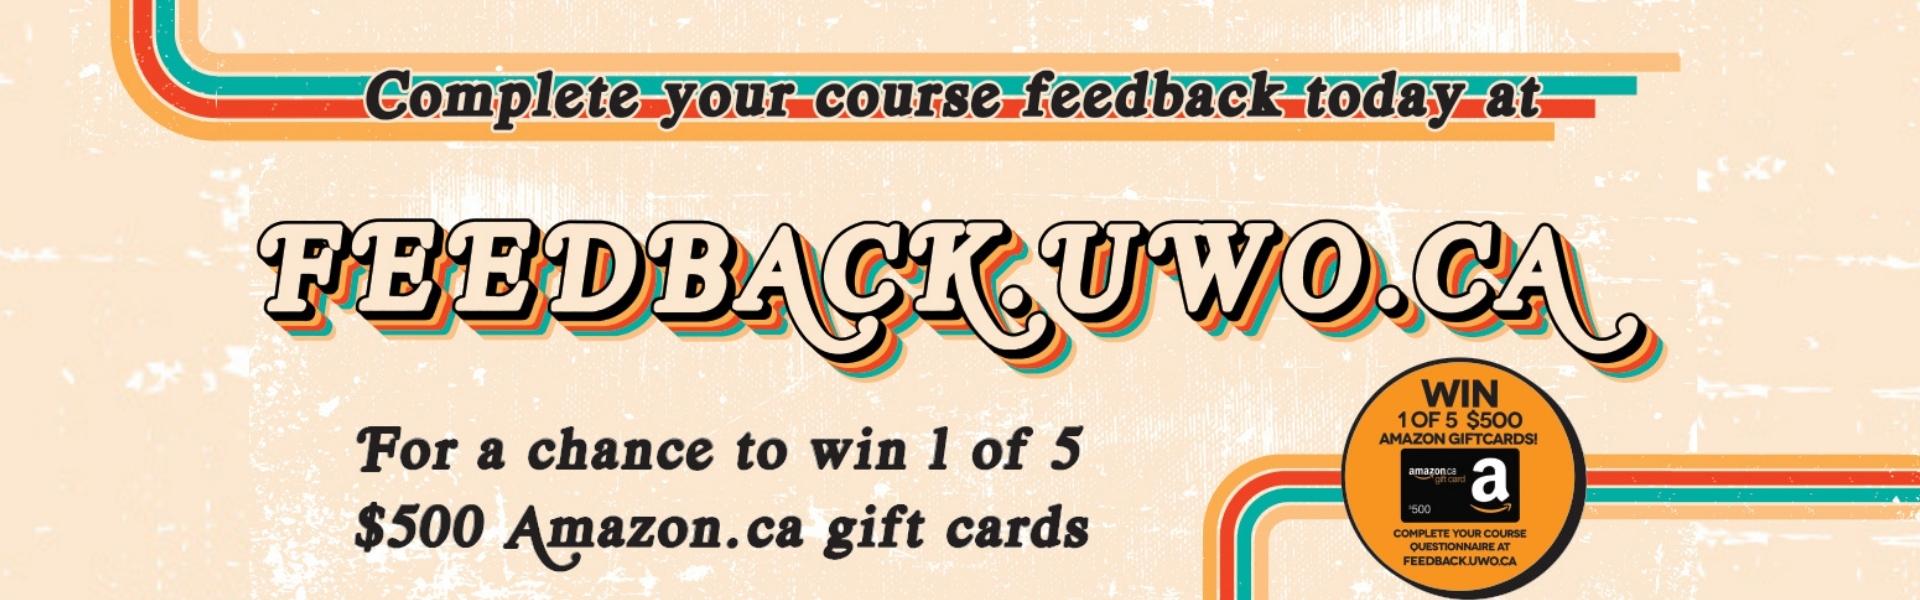 Complete your course feedback today at feedback.uwo.ca